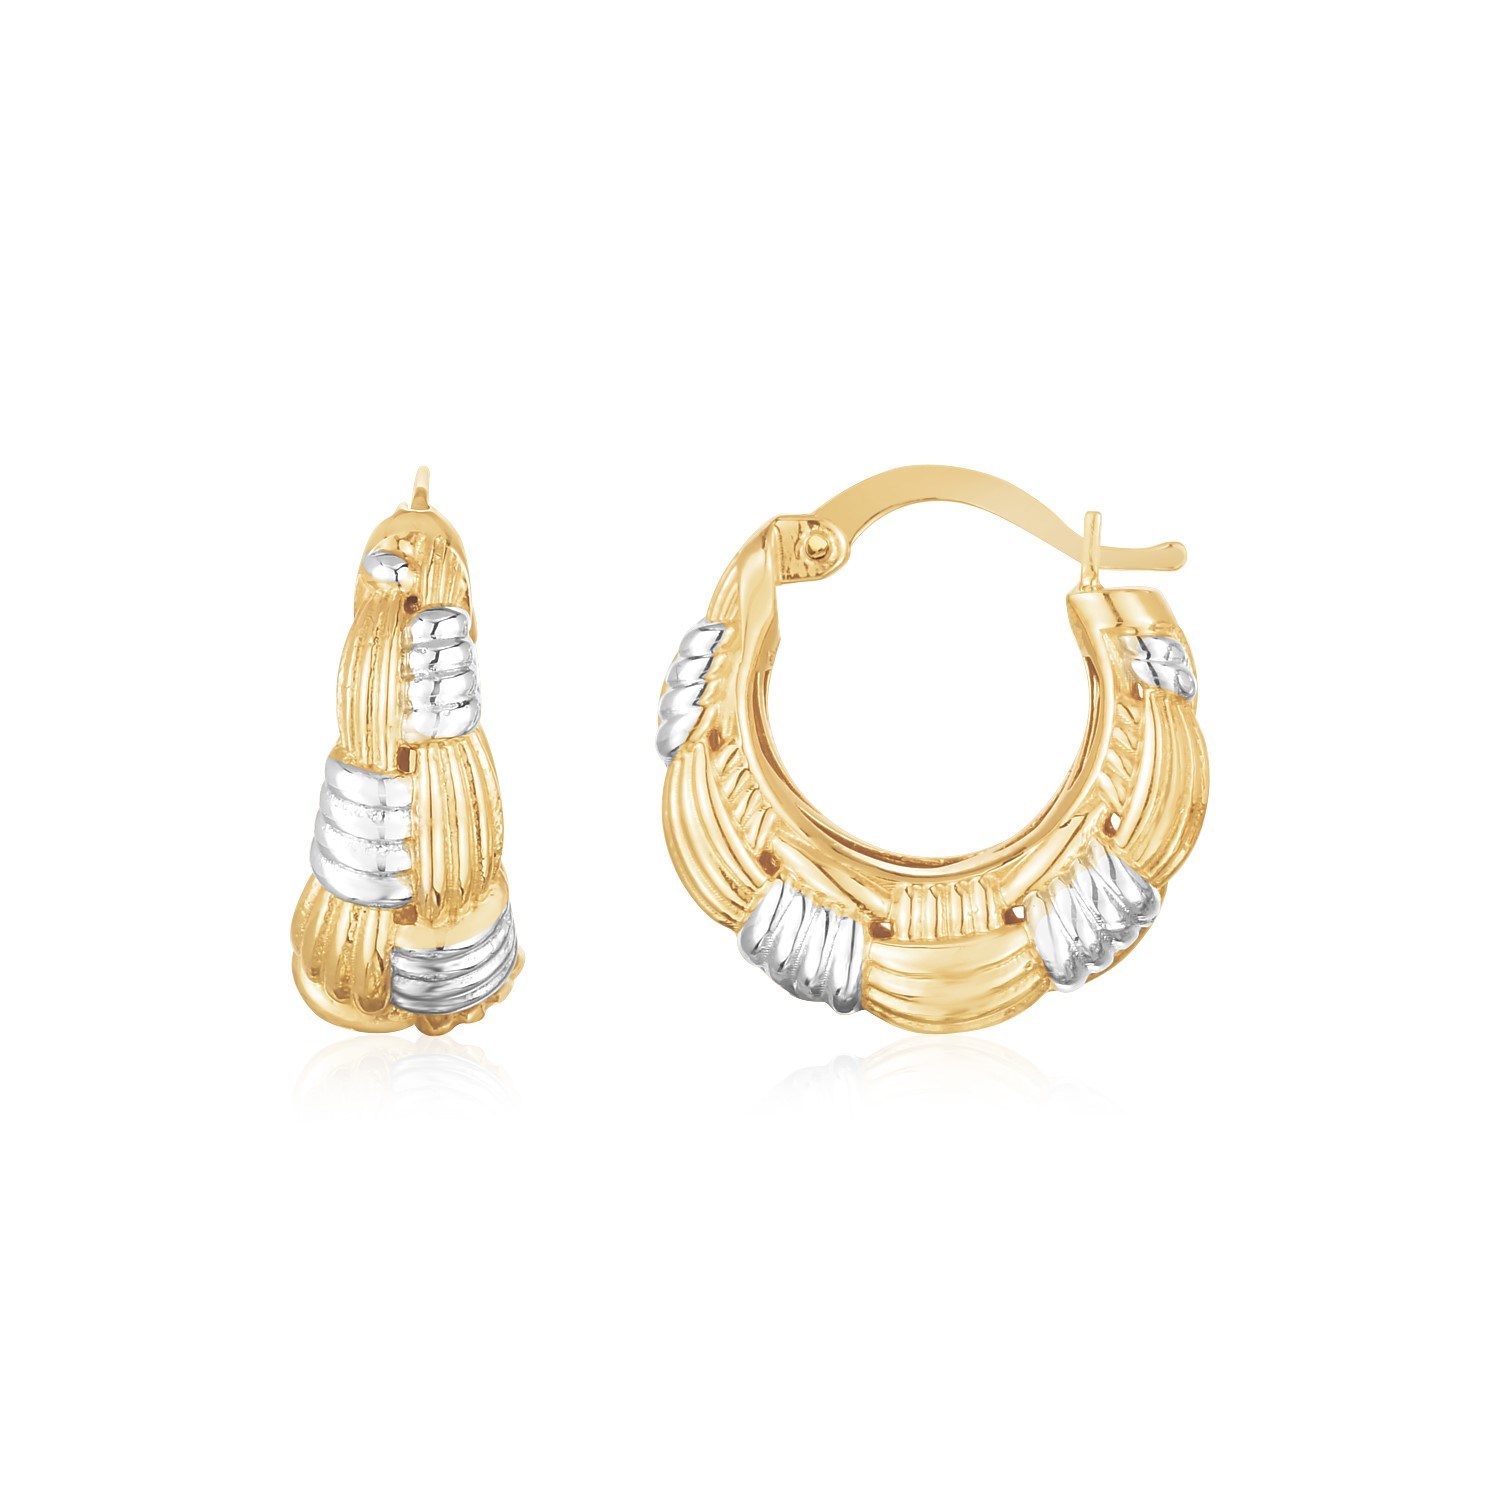 14K Two Tone Gold Graduated Woven Ribbed Hoop Earrings